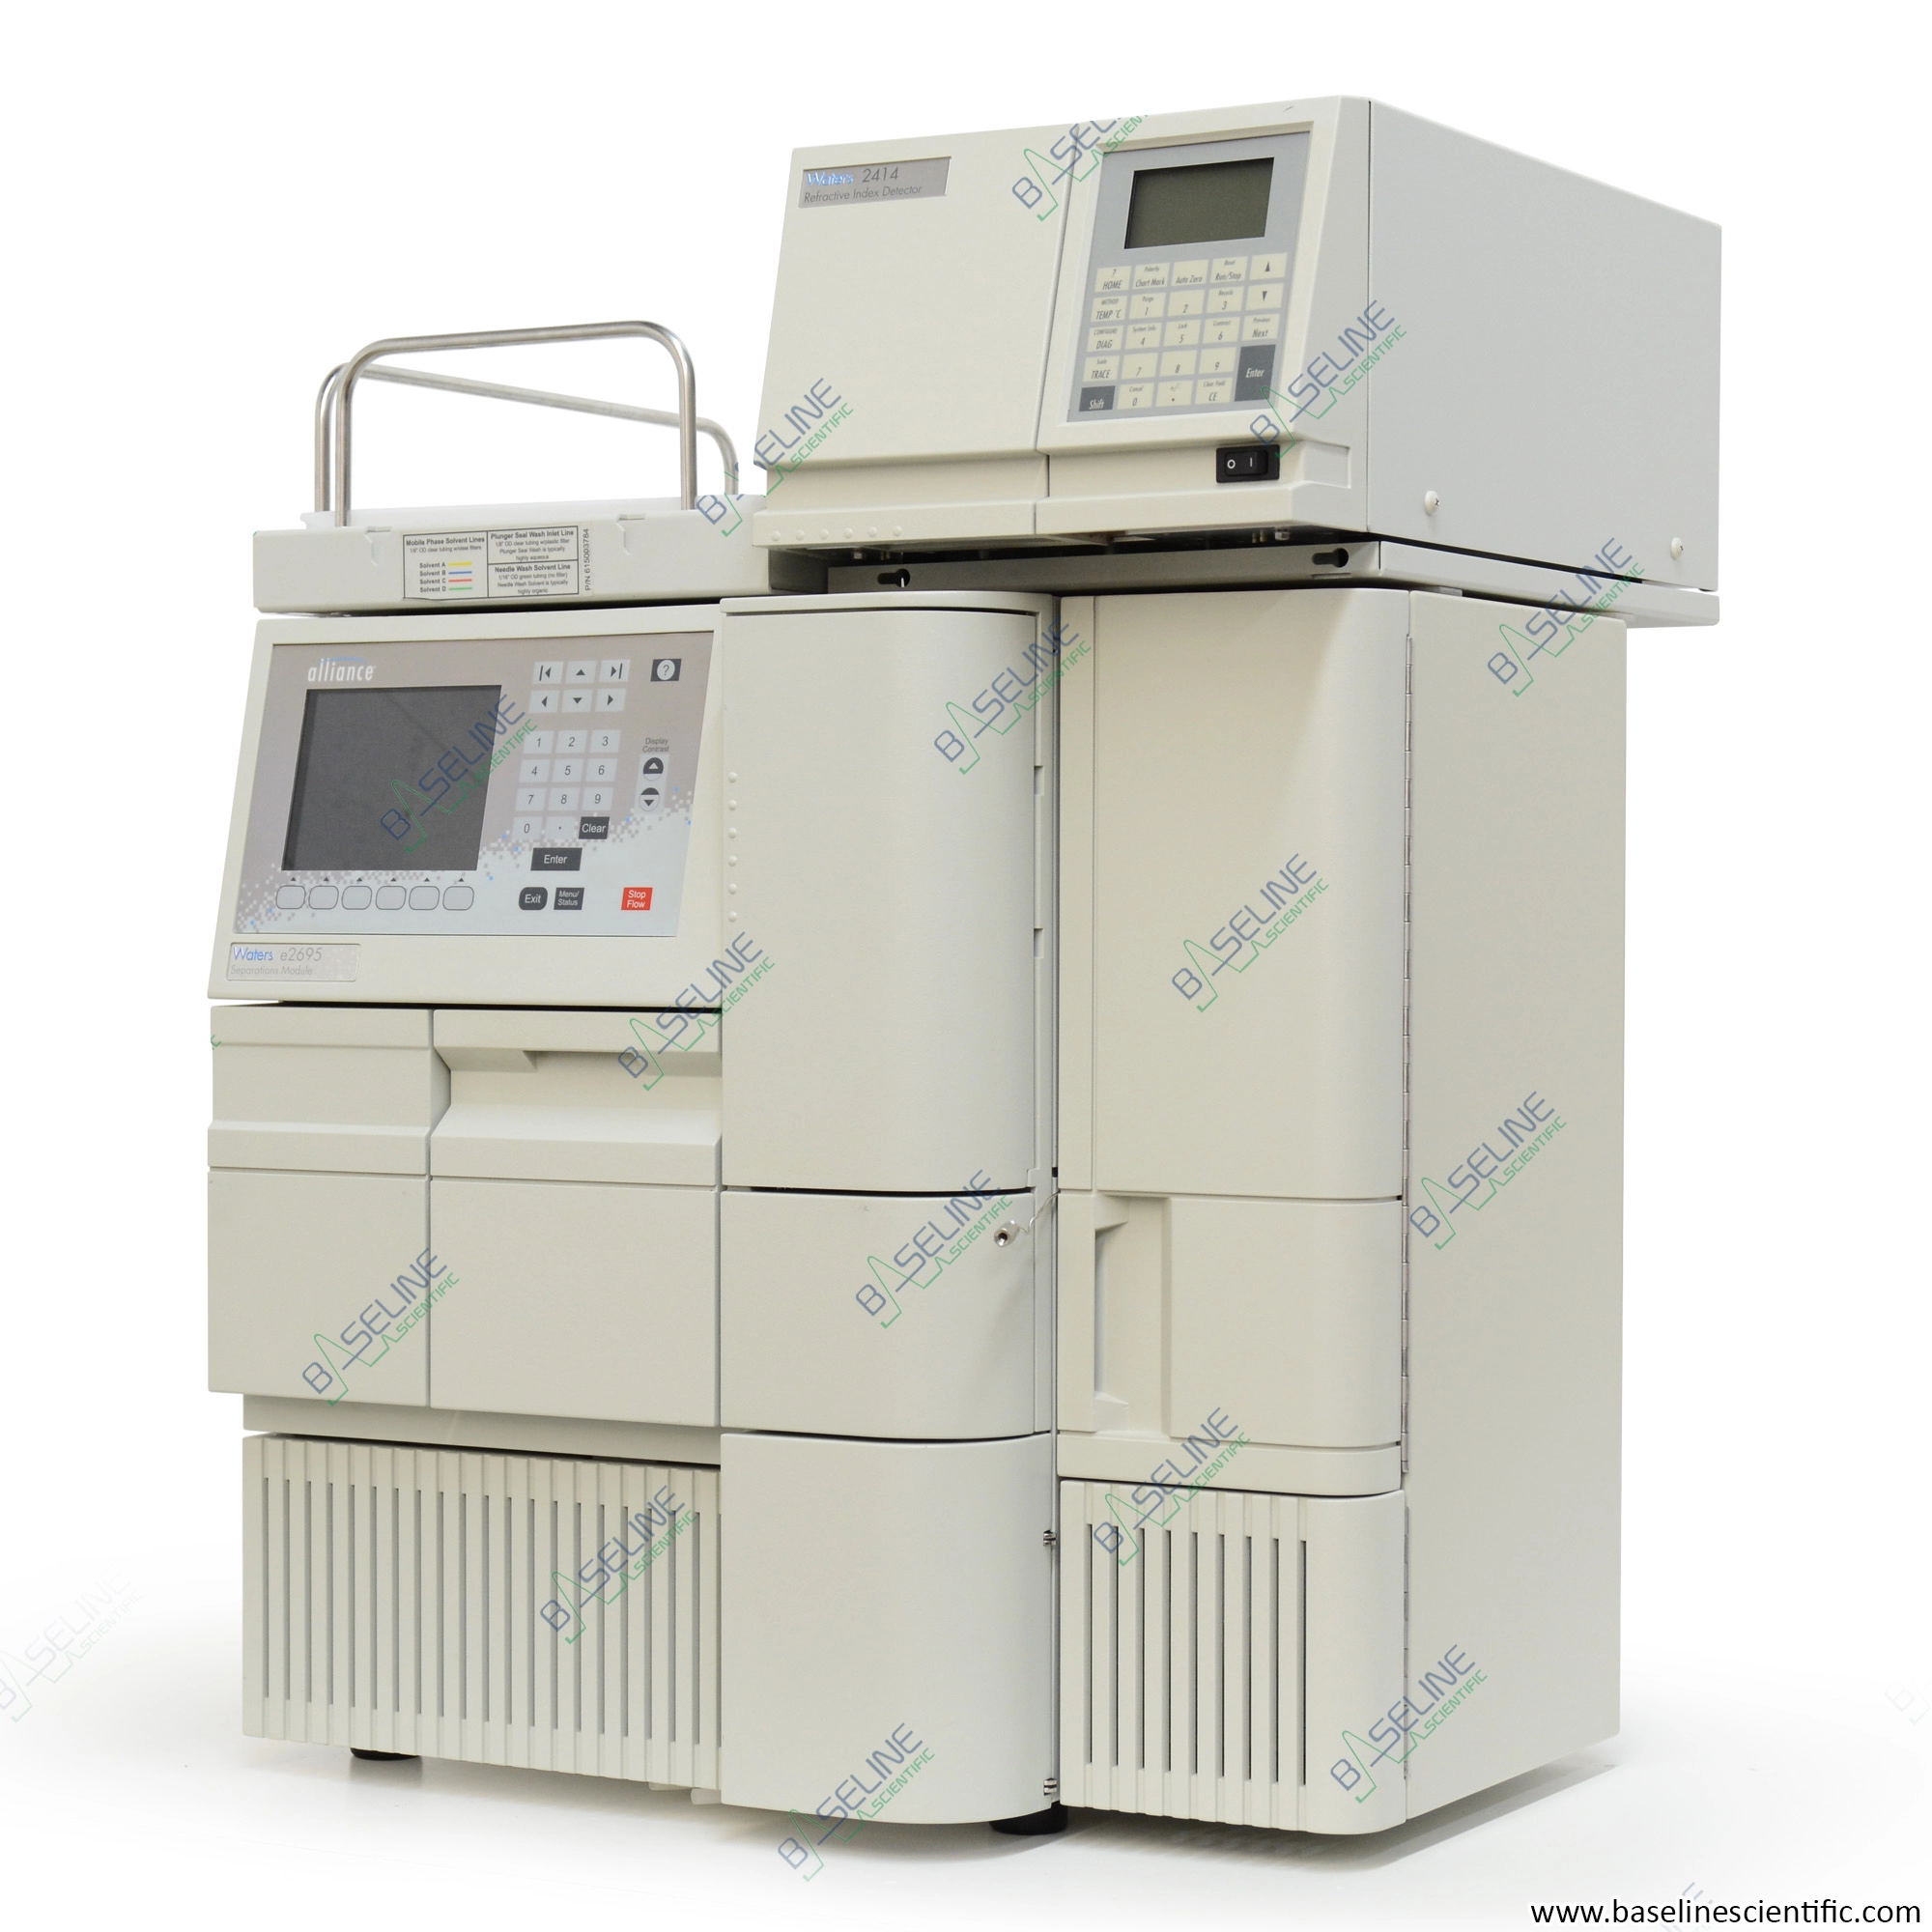 Refurbished Waters Alliance e2695 and 2414 Refractive Index Detector